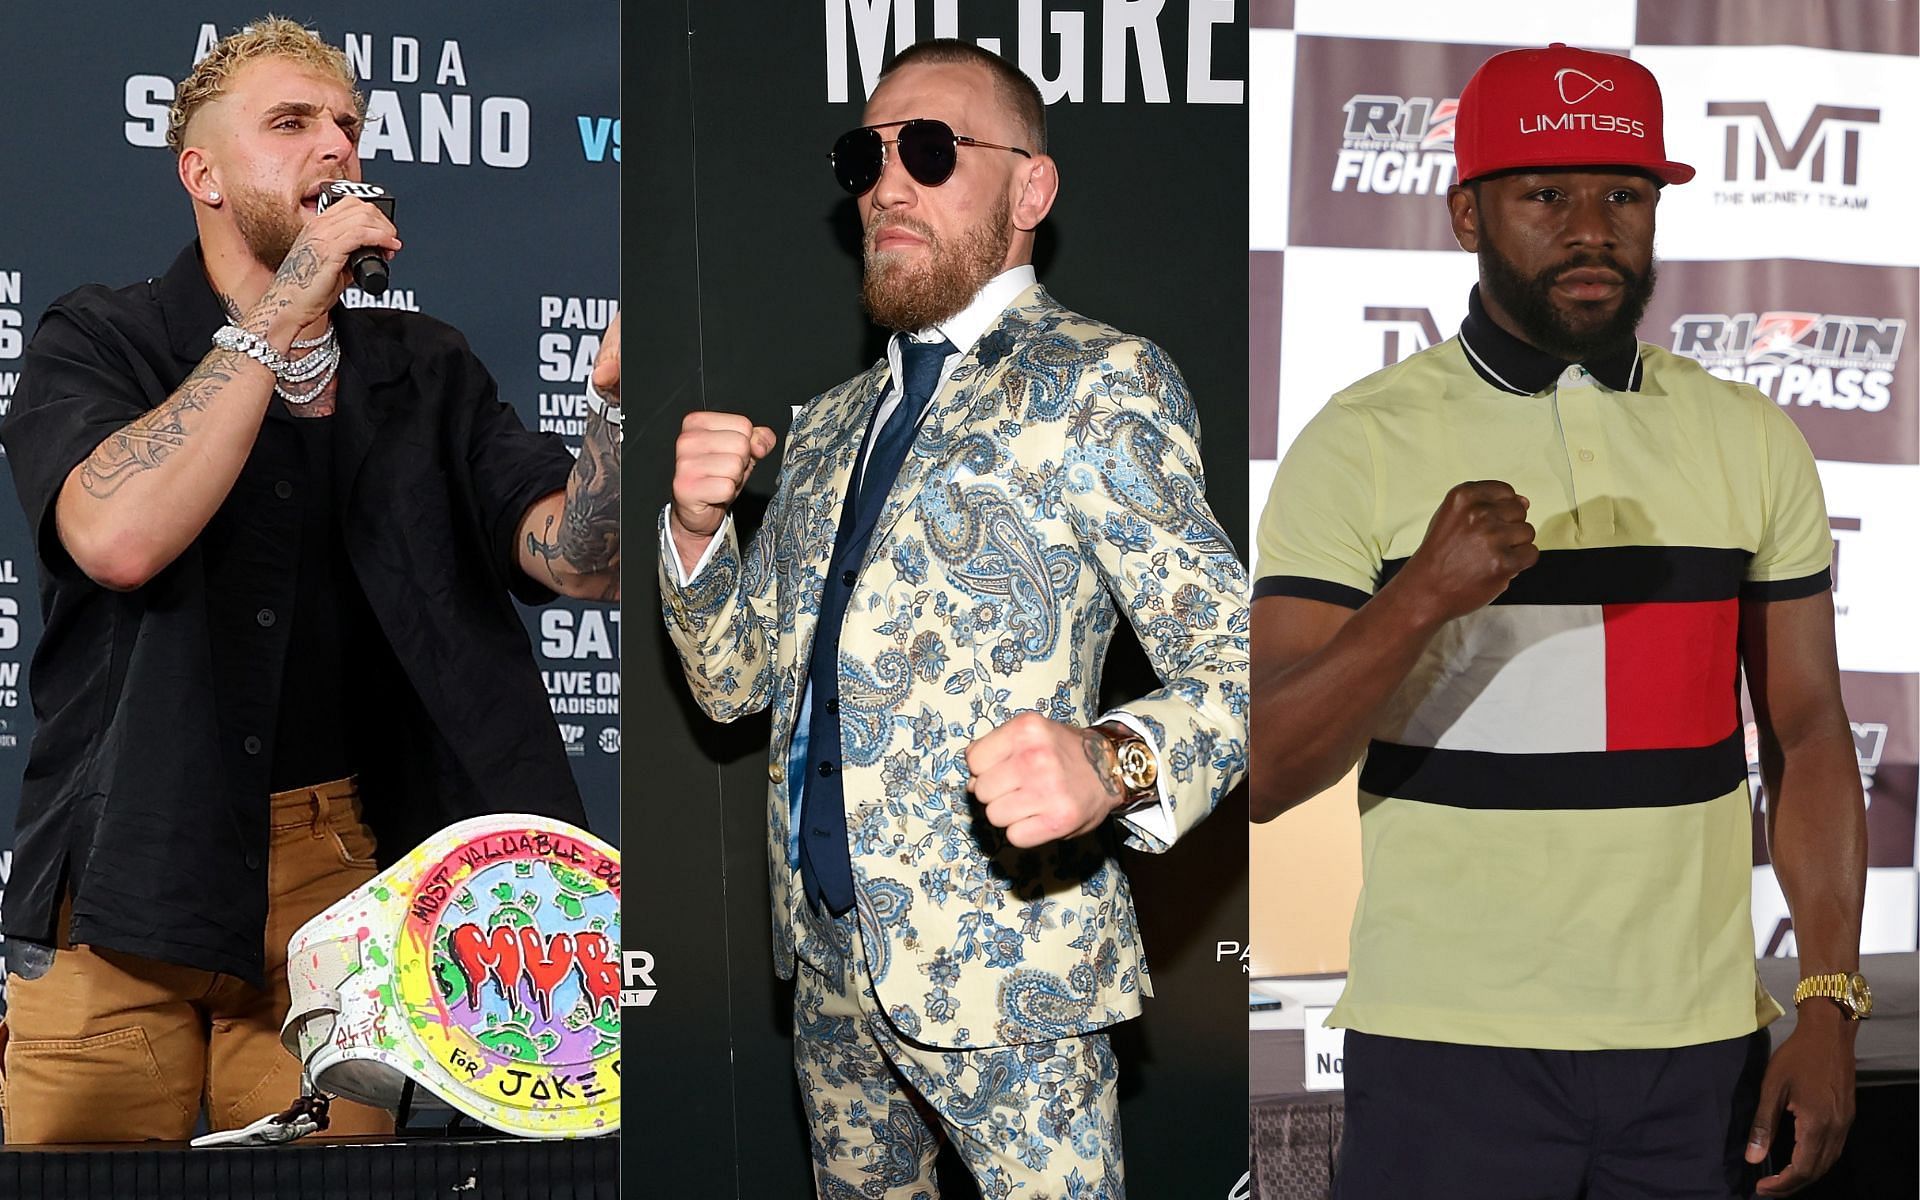 Jake Paul (L), Conor McGregor (M), and Floyd Mayweather (R) [ Image credits: Getty Images ]